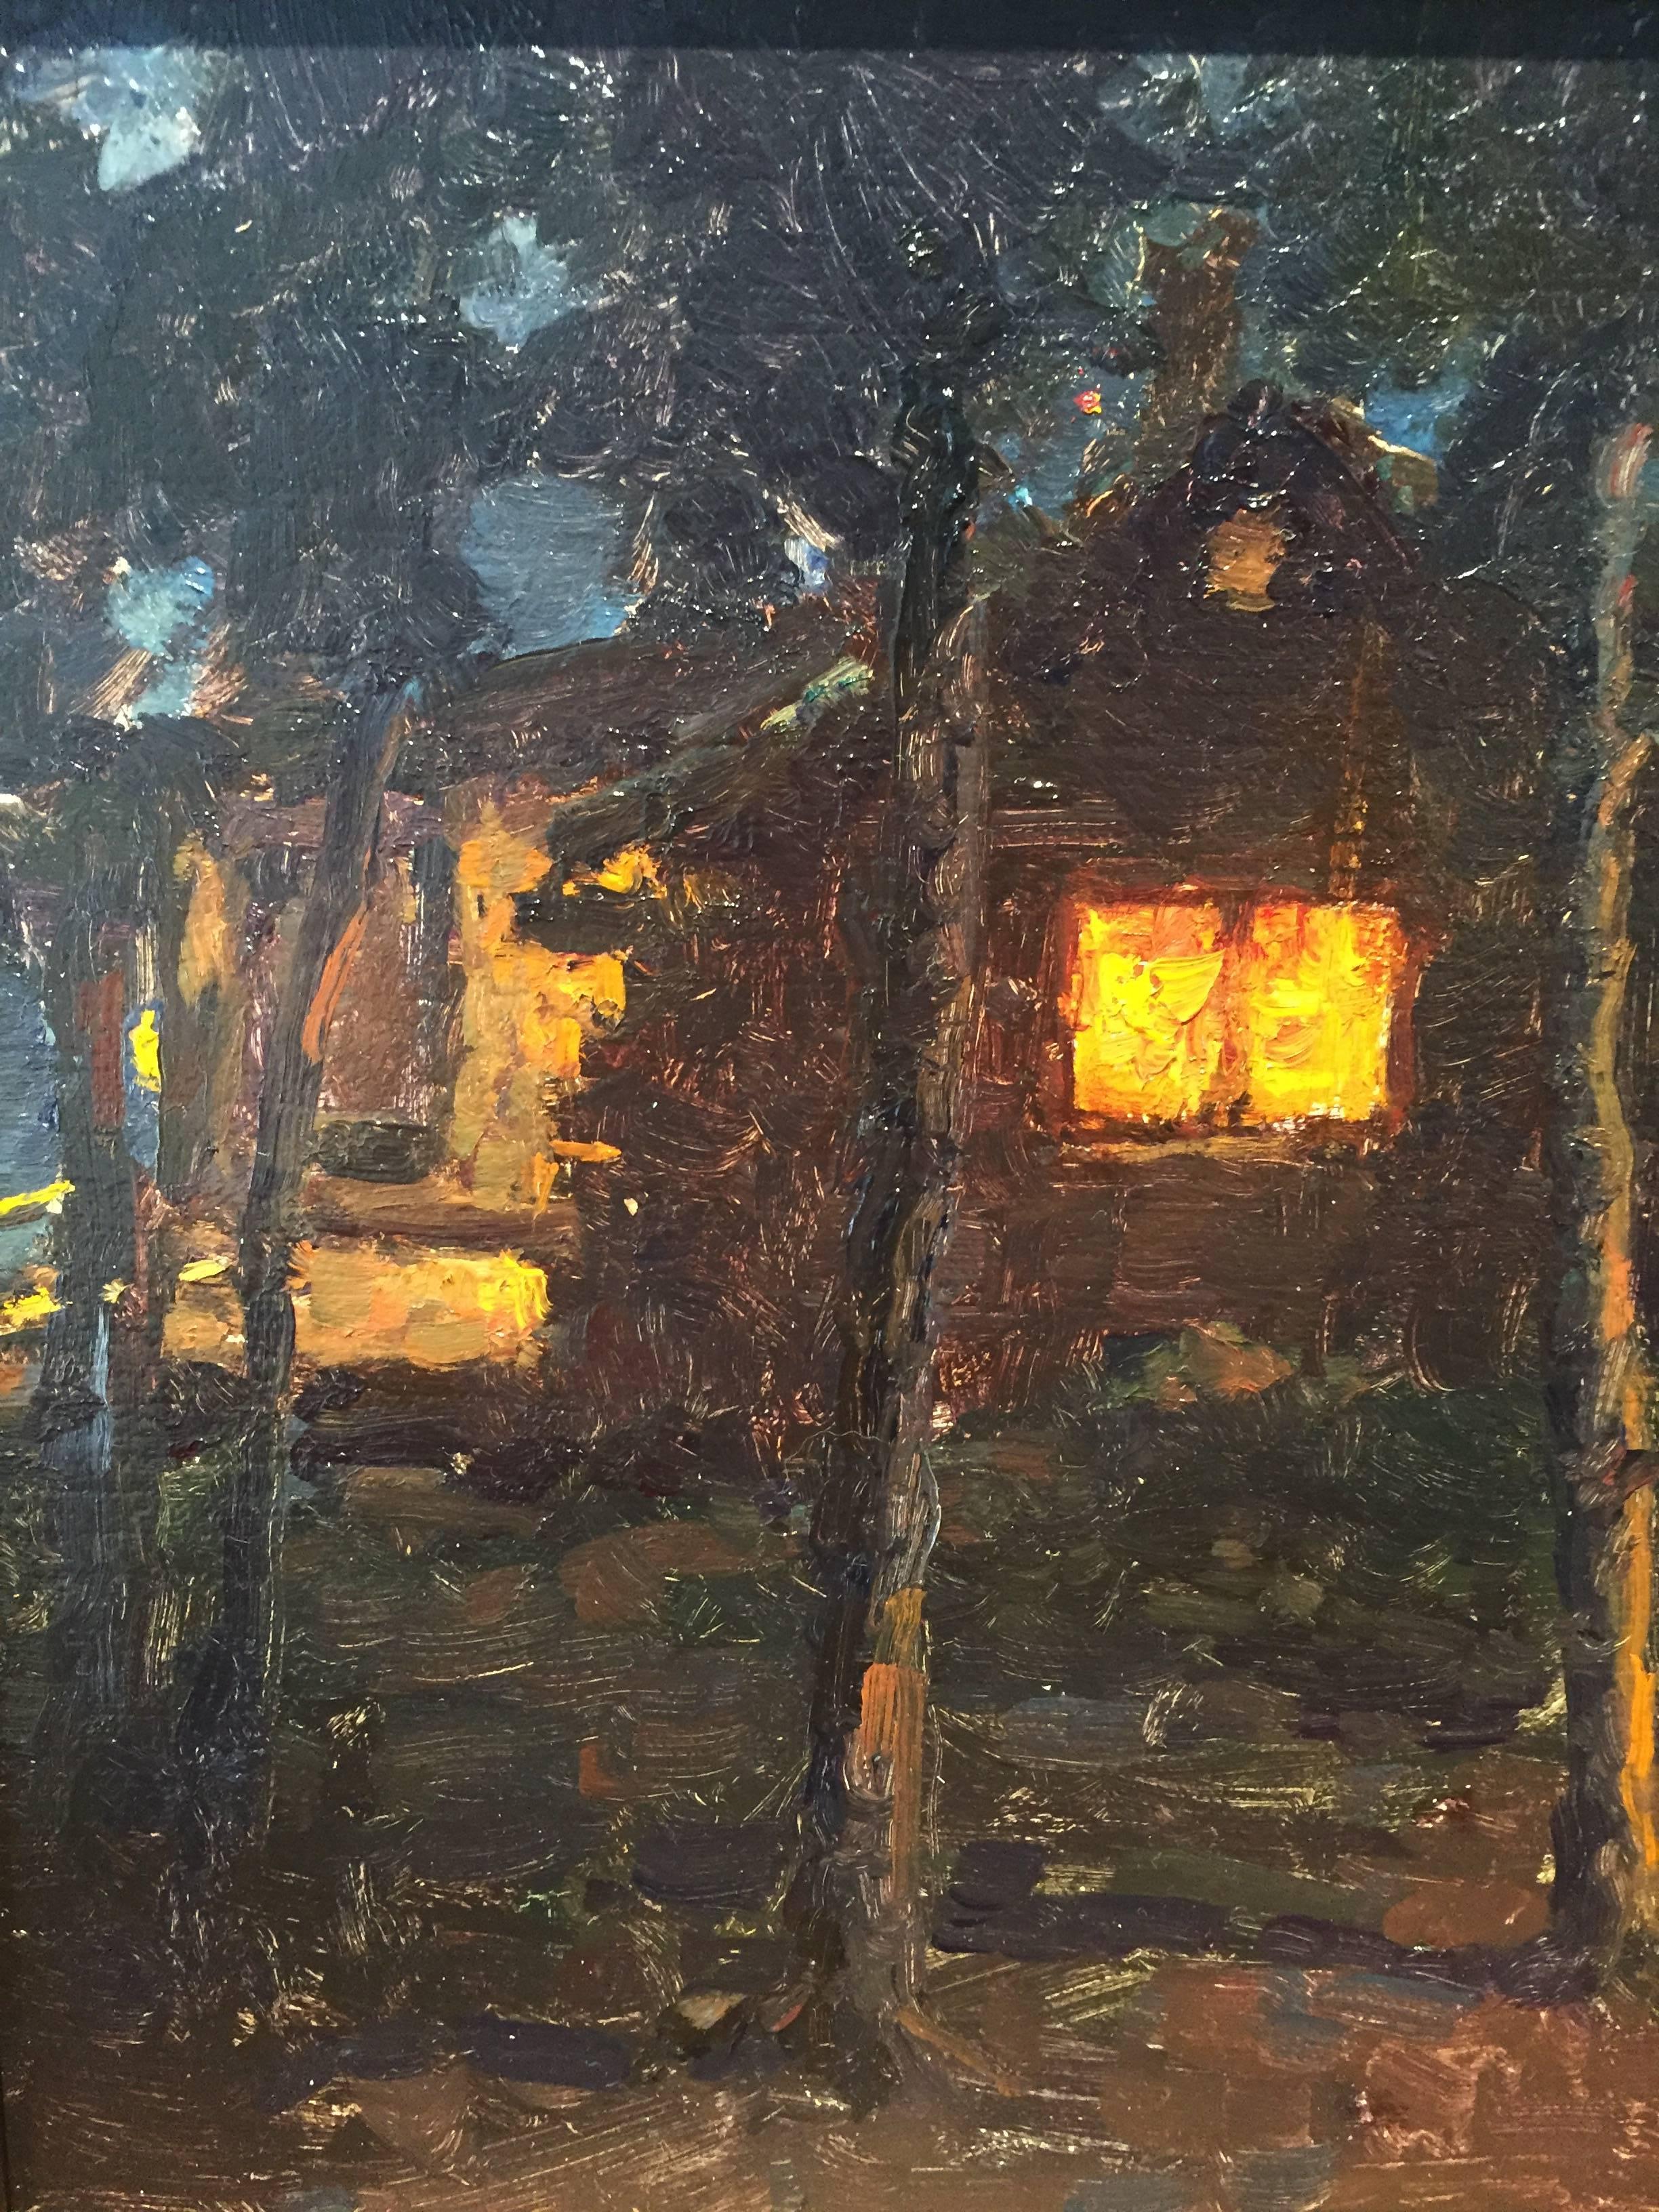 Painted en plein-air, in Stonington, Maine, USA. In October 2016, Bretzke joined the Russian-American Painting Alliance under the guidance of Grenning Painter, Ben Fenske. The group of 8 painters traveled and painted en-plein-air for 4 weeks. Cabin